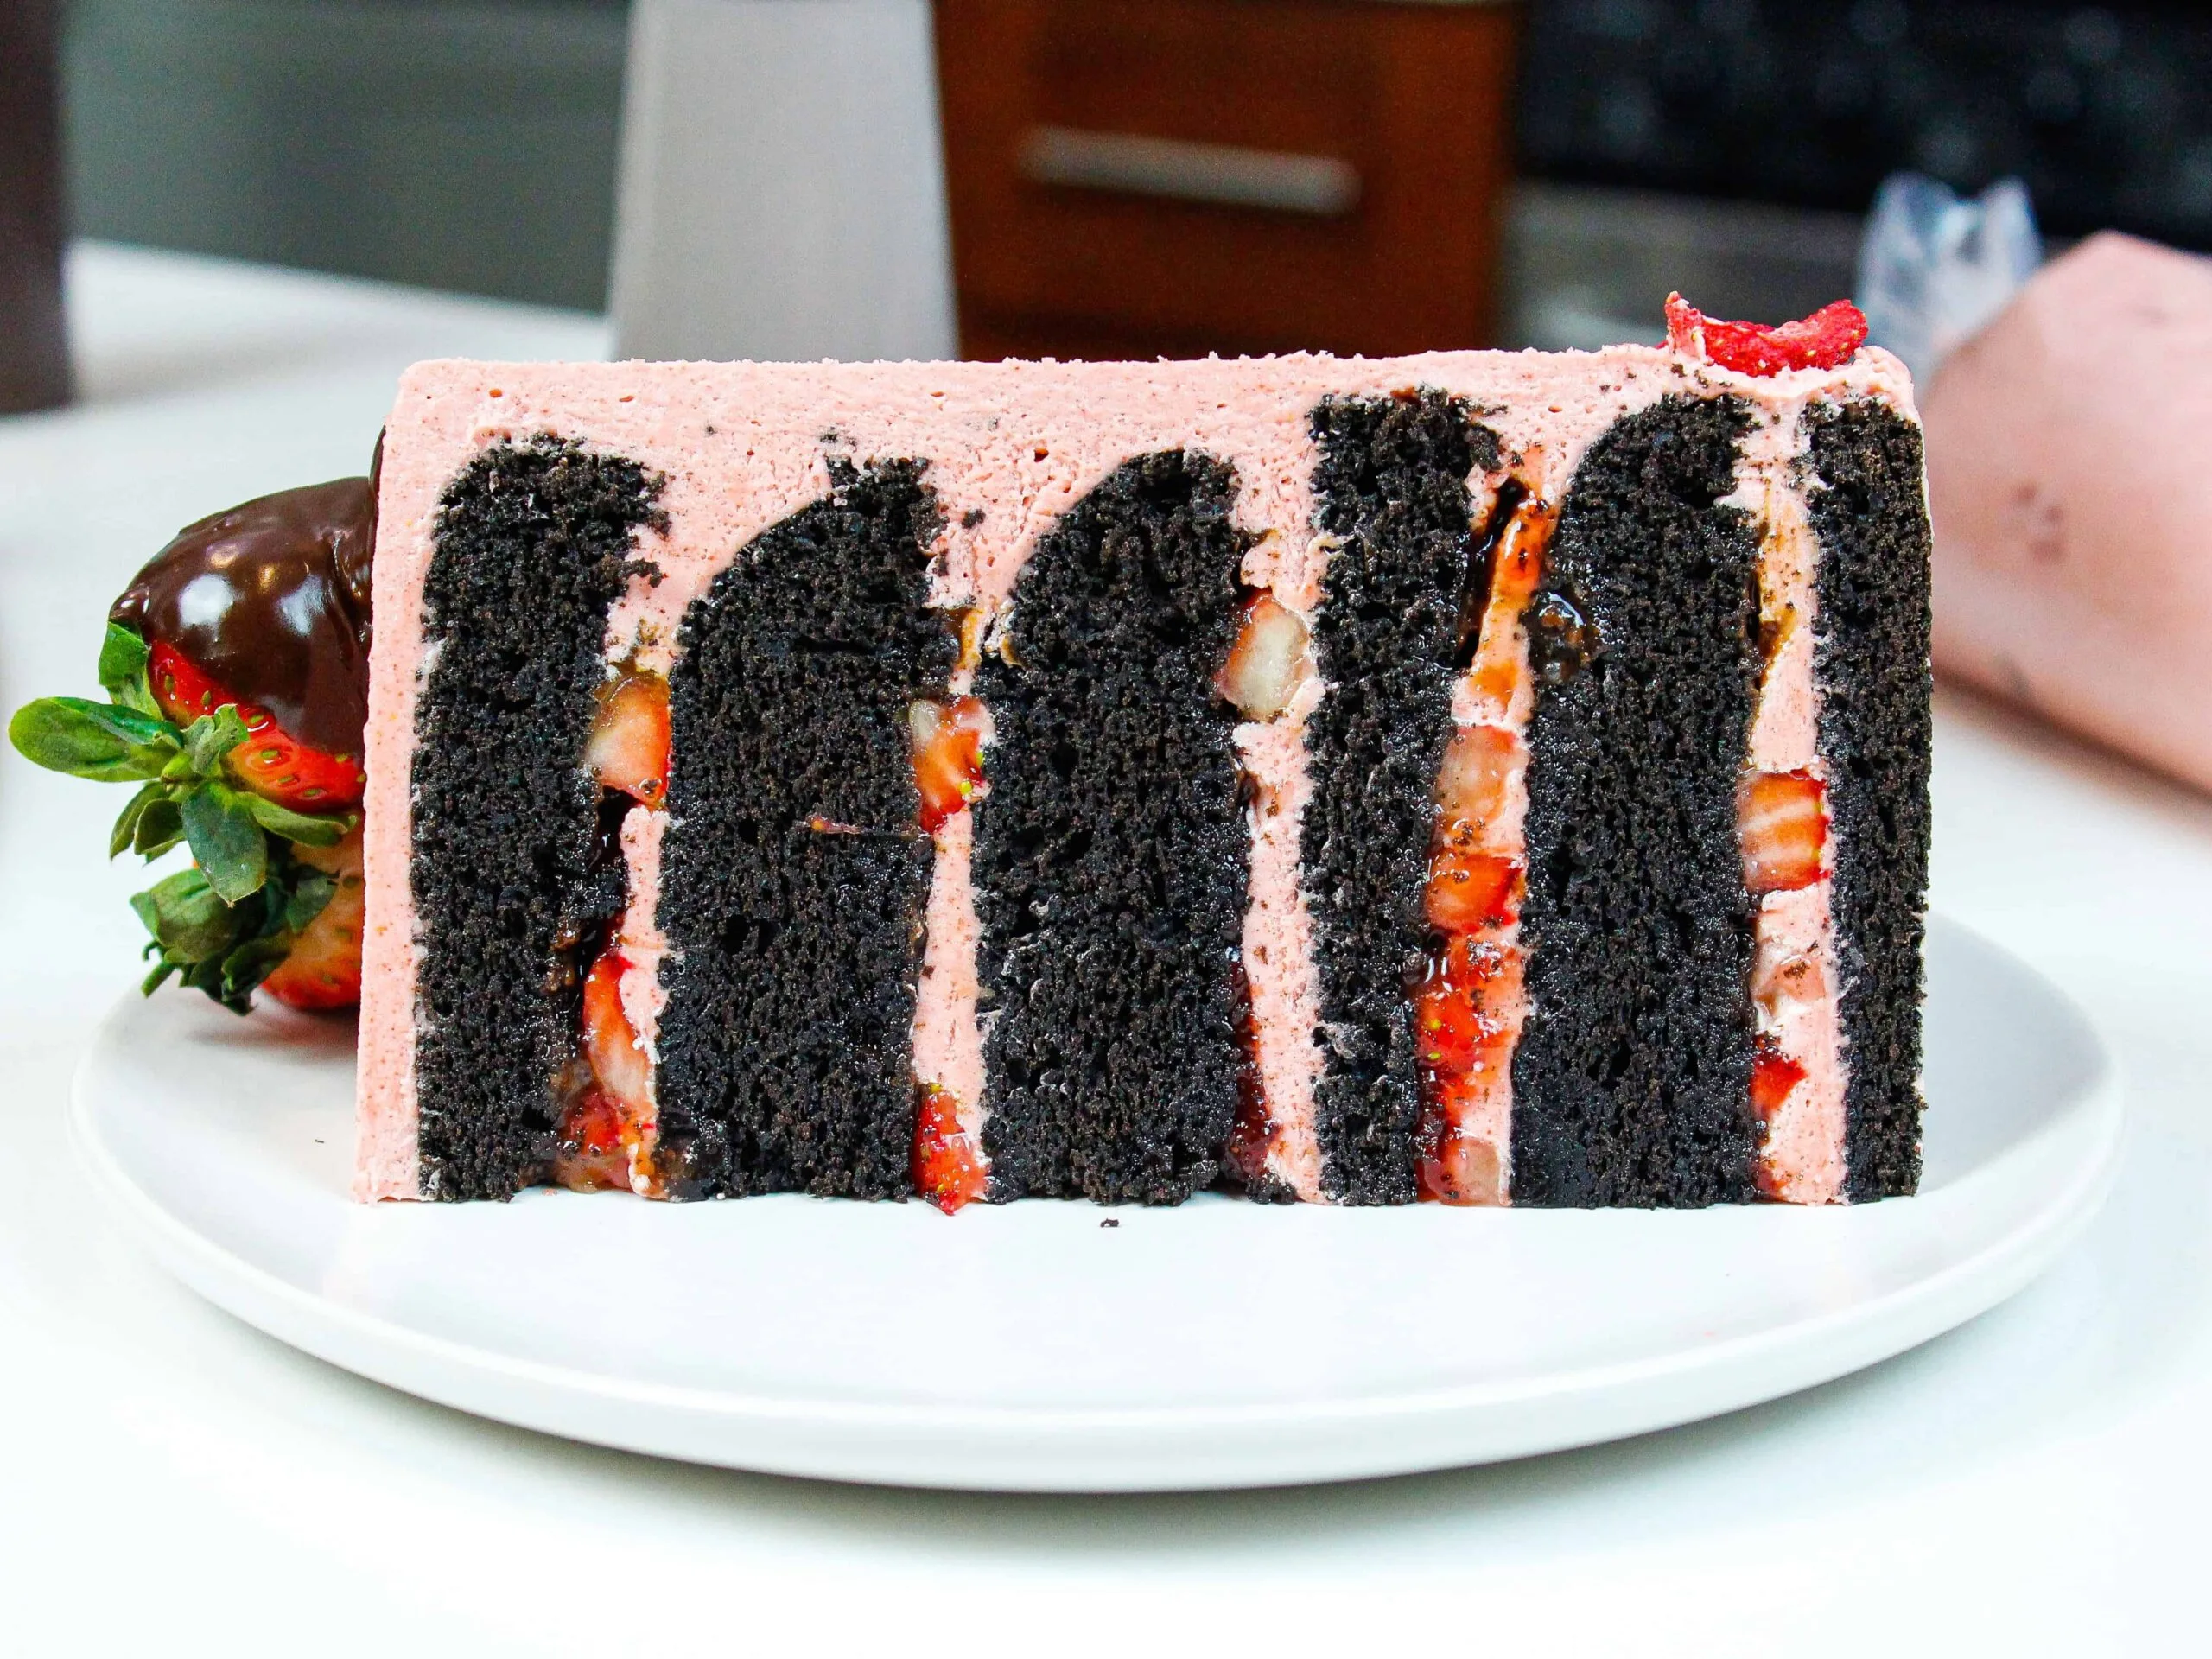 image of chocolate cake with strawberry filling